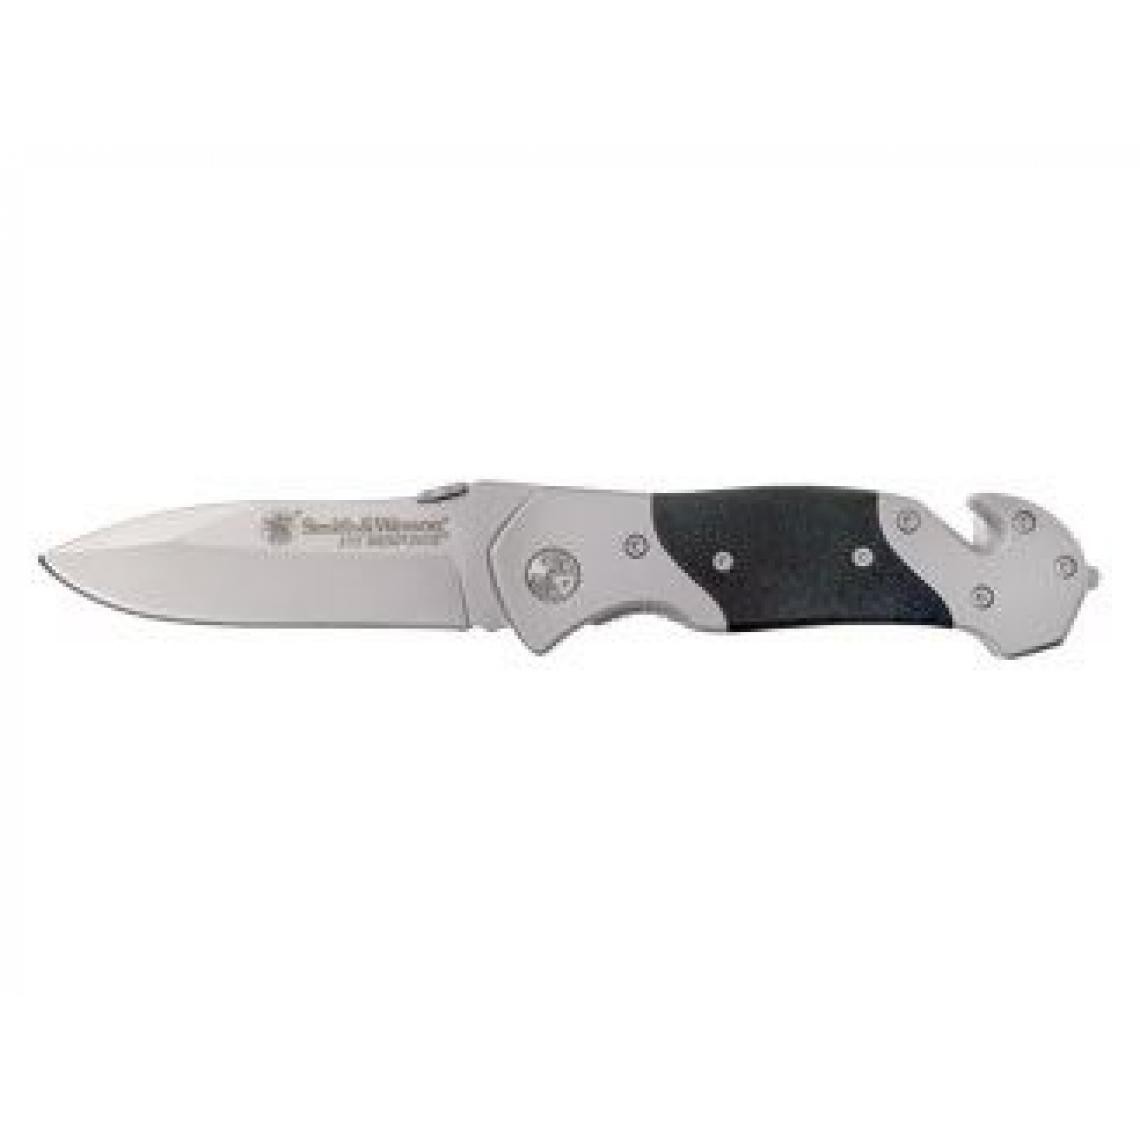 Smith & Wesson - Smith & Wesson FOLDING FIRST RESPONSE SWFR - Outils de coupe